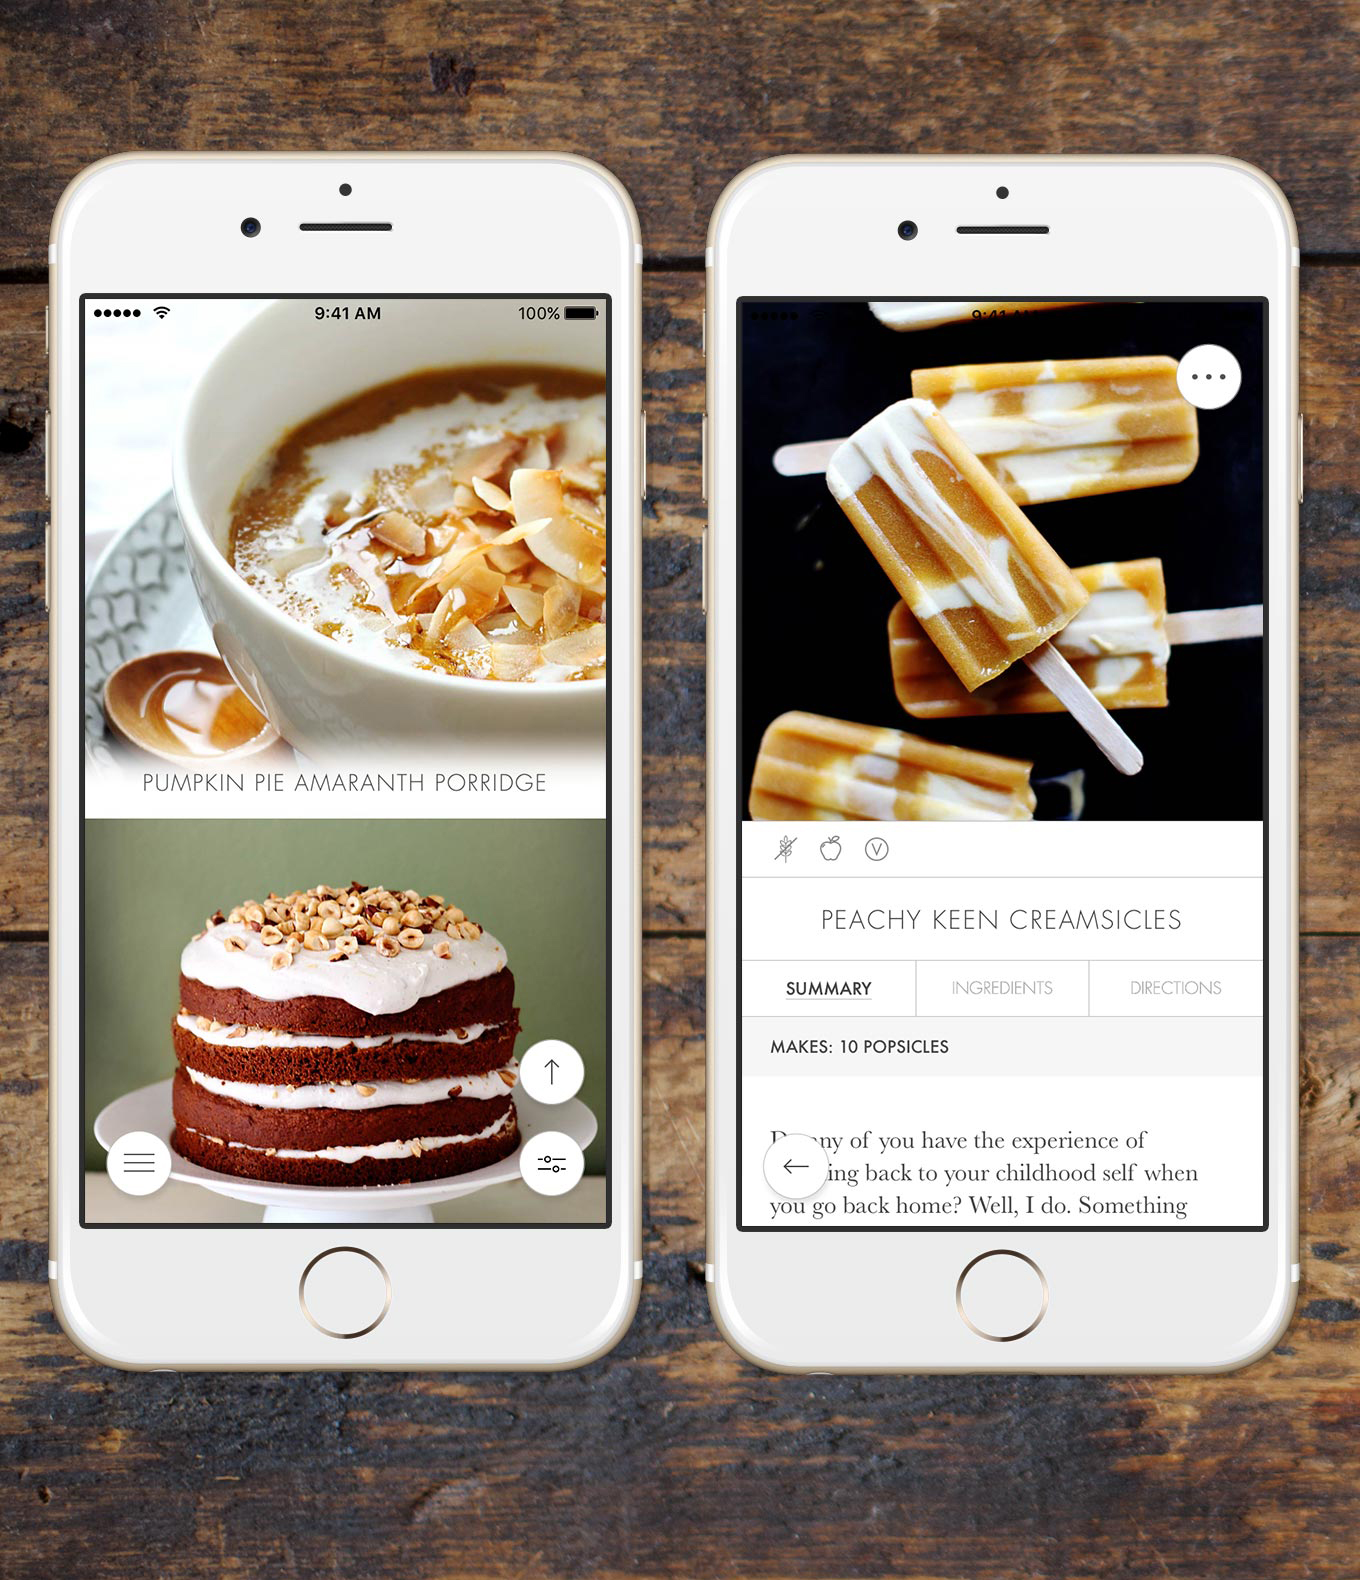 Doenload the My New Roots vegetarian cooking app